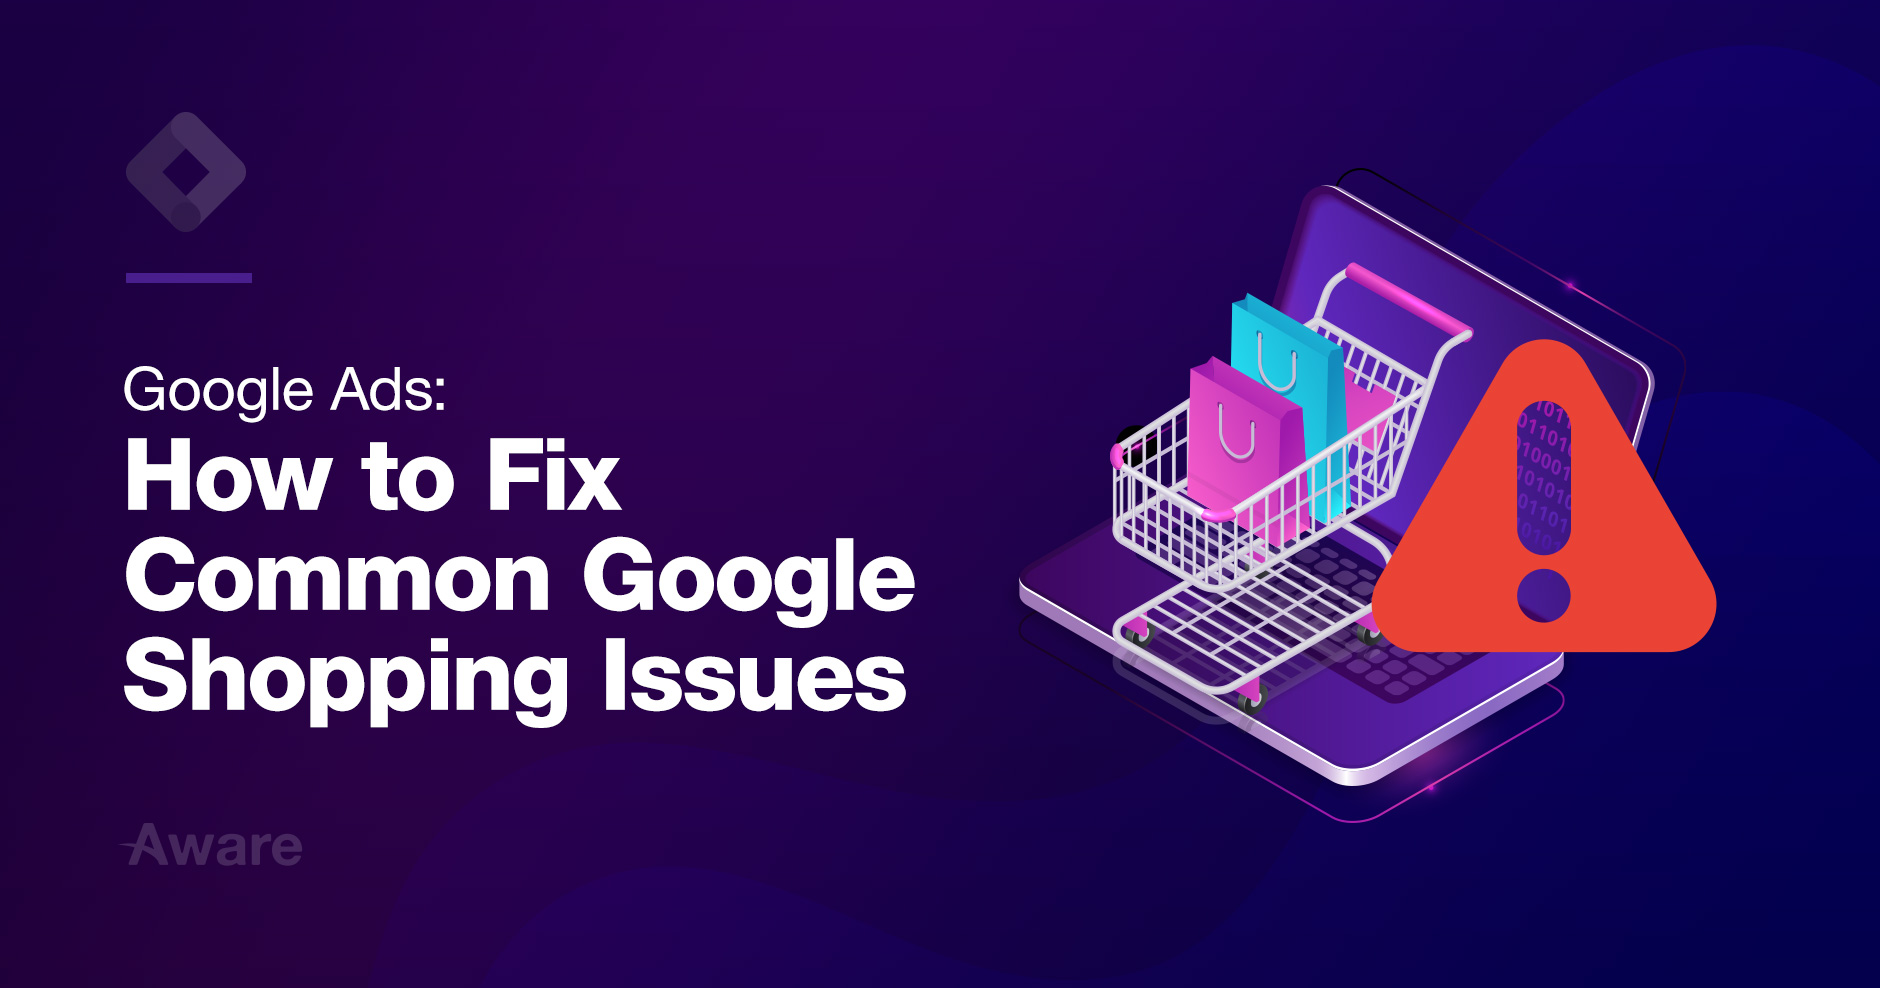 How to Fix Common Google Shopping Issues